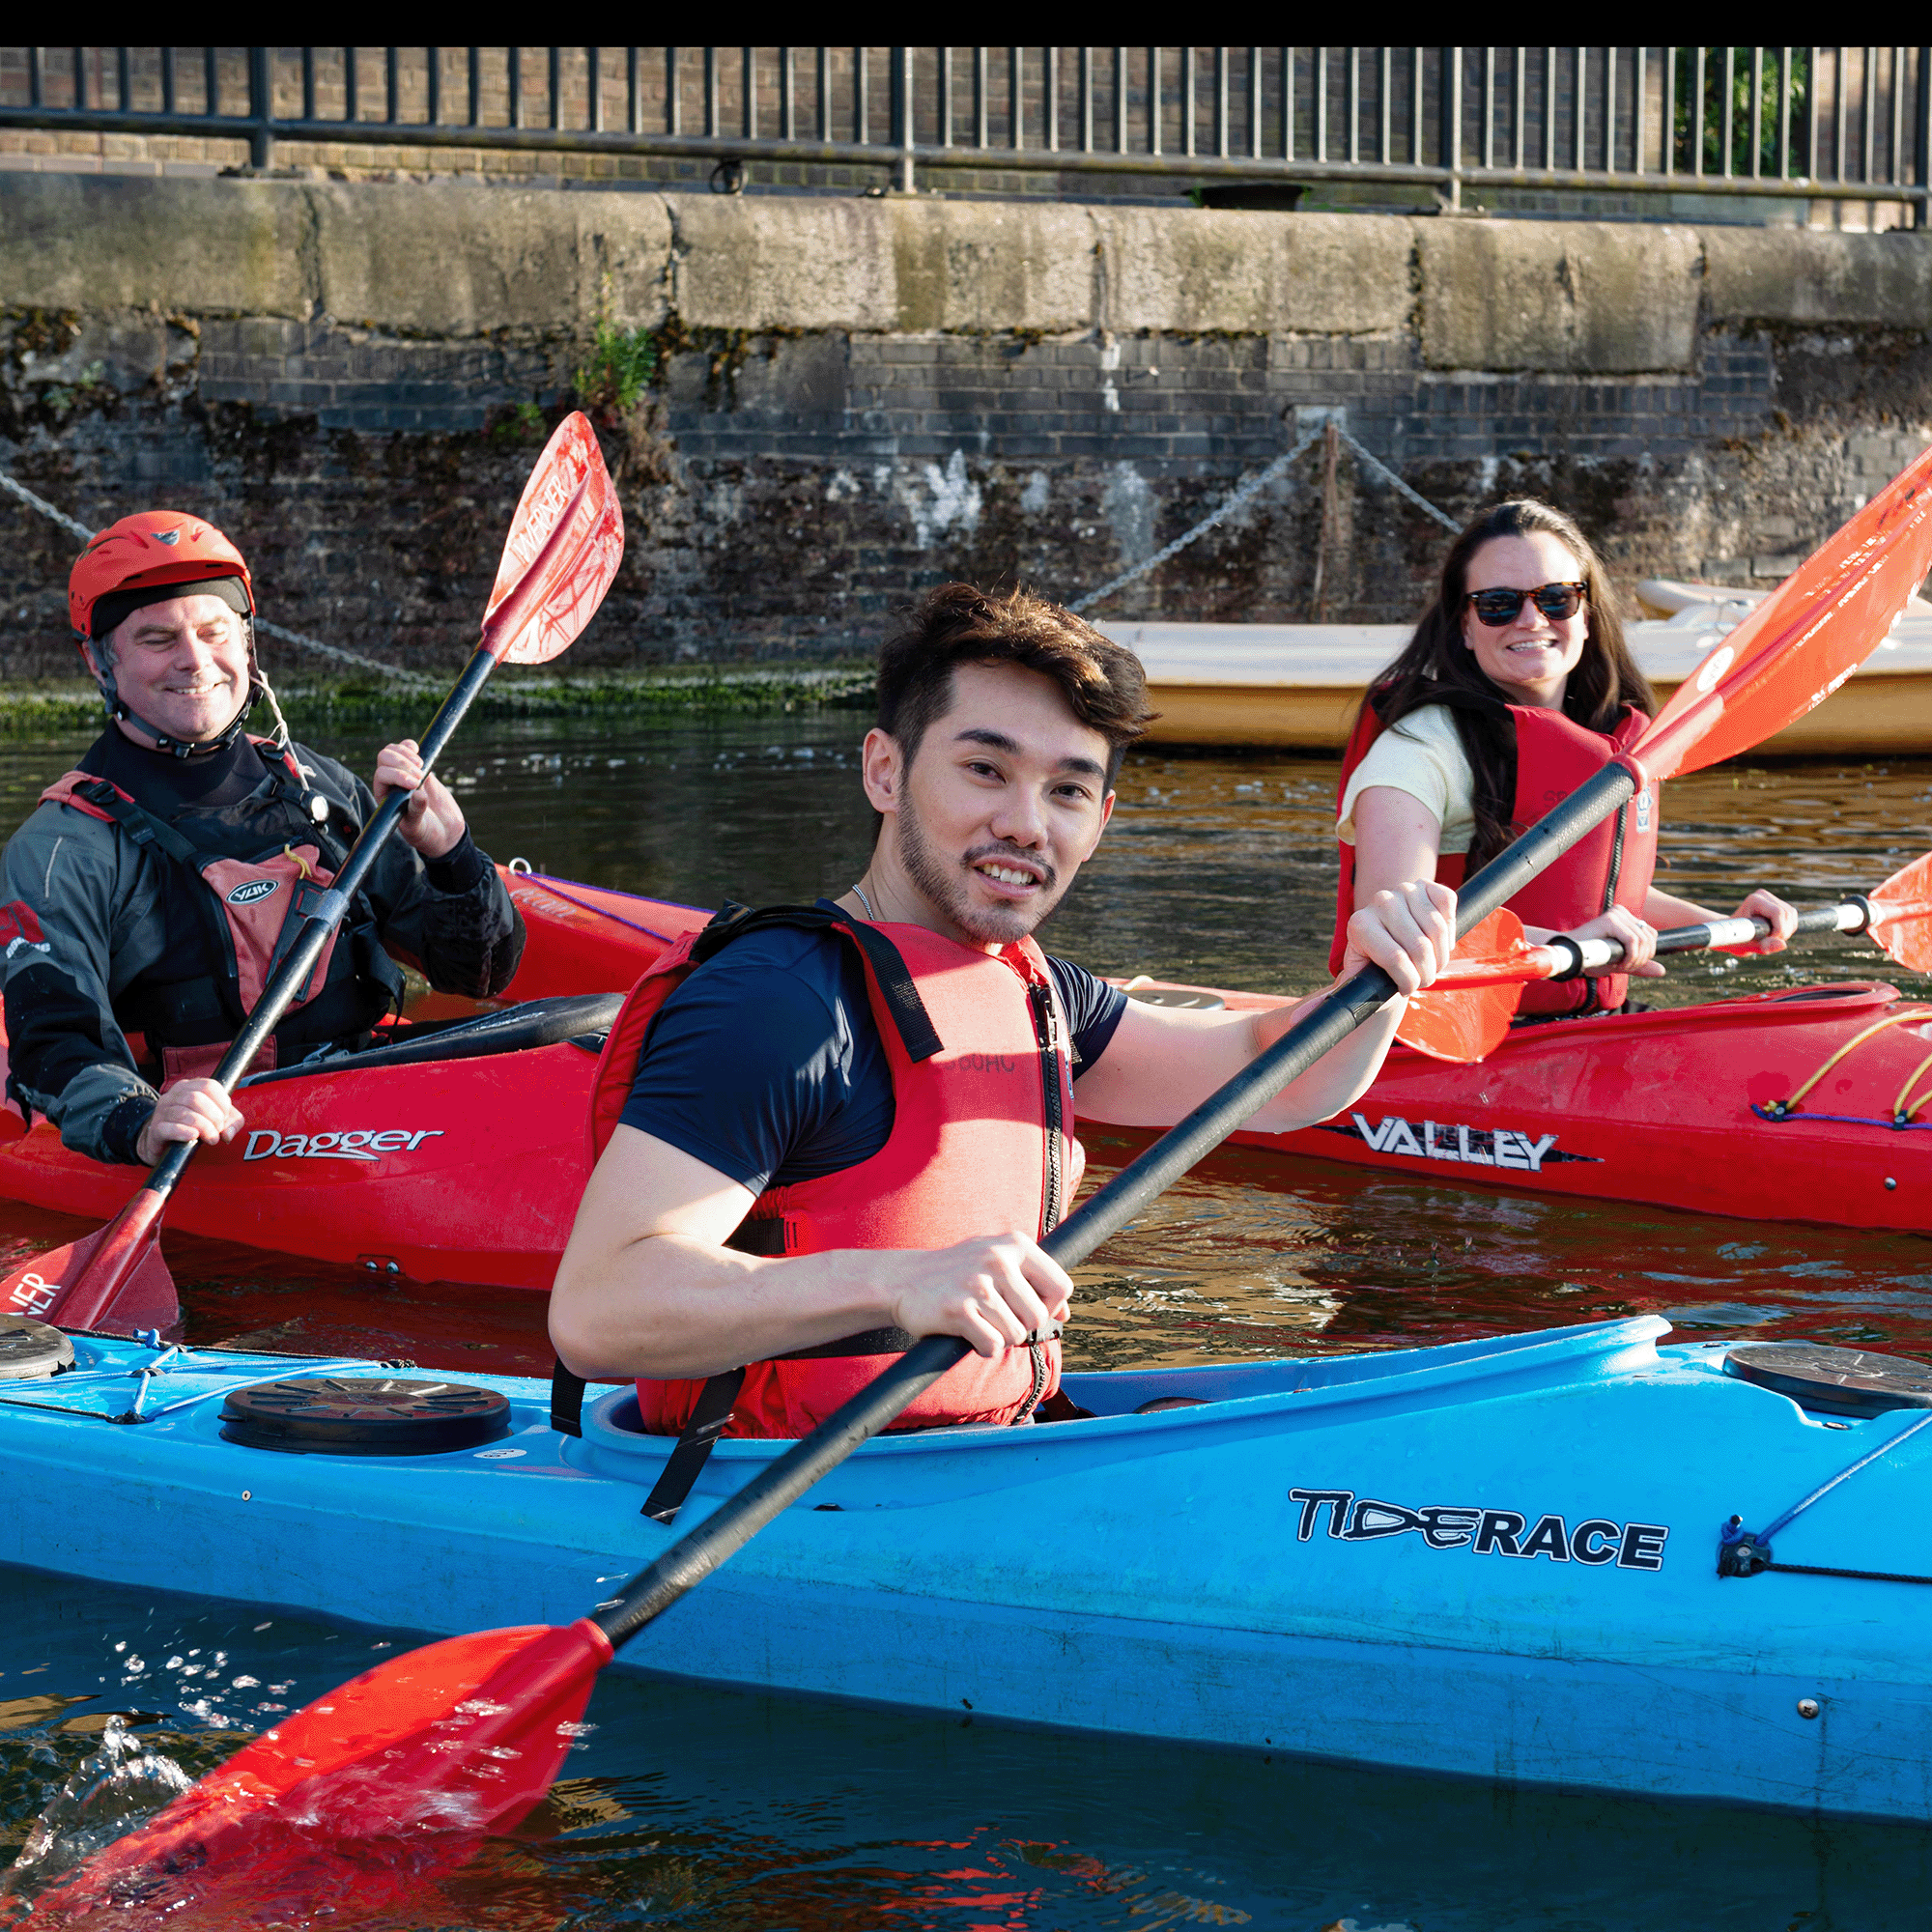 The Thames awaits new VIPs - visually impaired paddlers